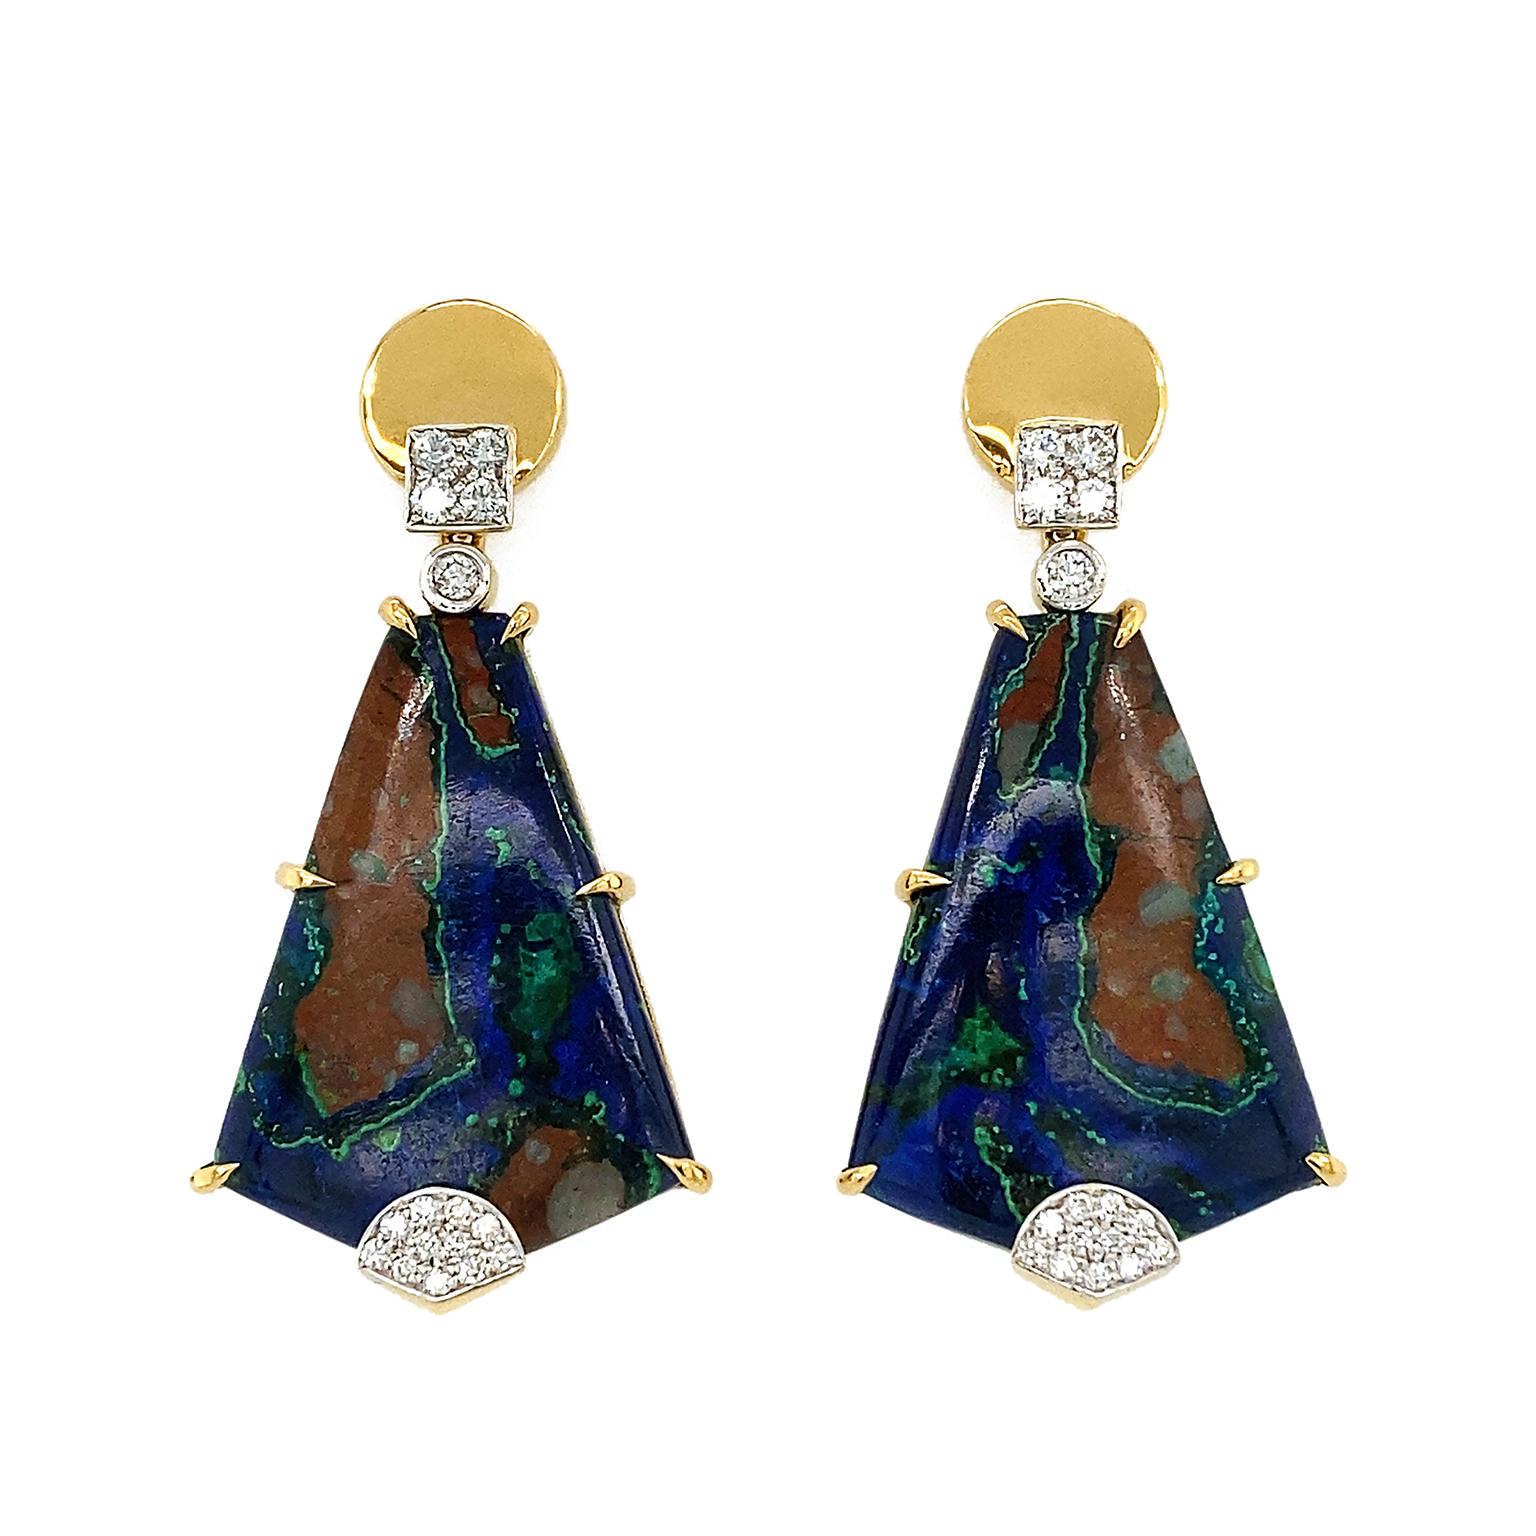 The beauty of merged gemstones, vivid blues of azurite and landscape hues of malachite, are the keynote of these earrings. 18k yellow gold rounds with four brilliant cut diamonds pavé set at the lower part, lead to a single diamond. Next gold prongs